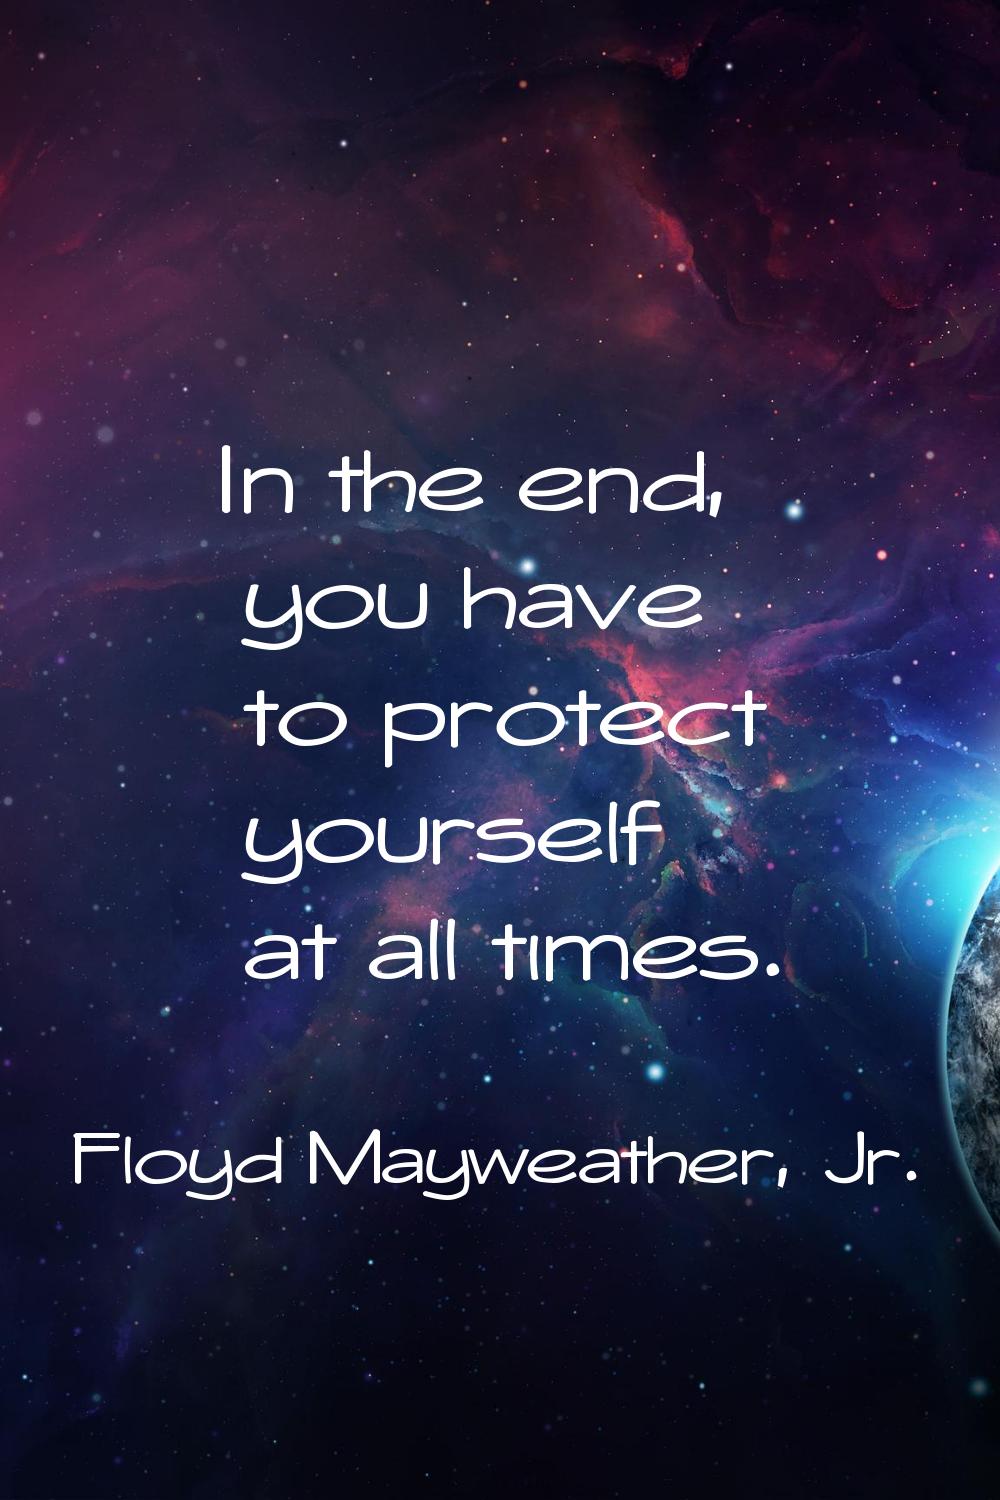 In the end, you have to protect yourself at all times.